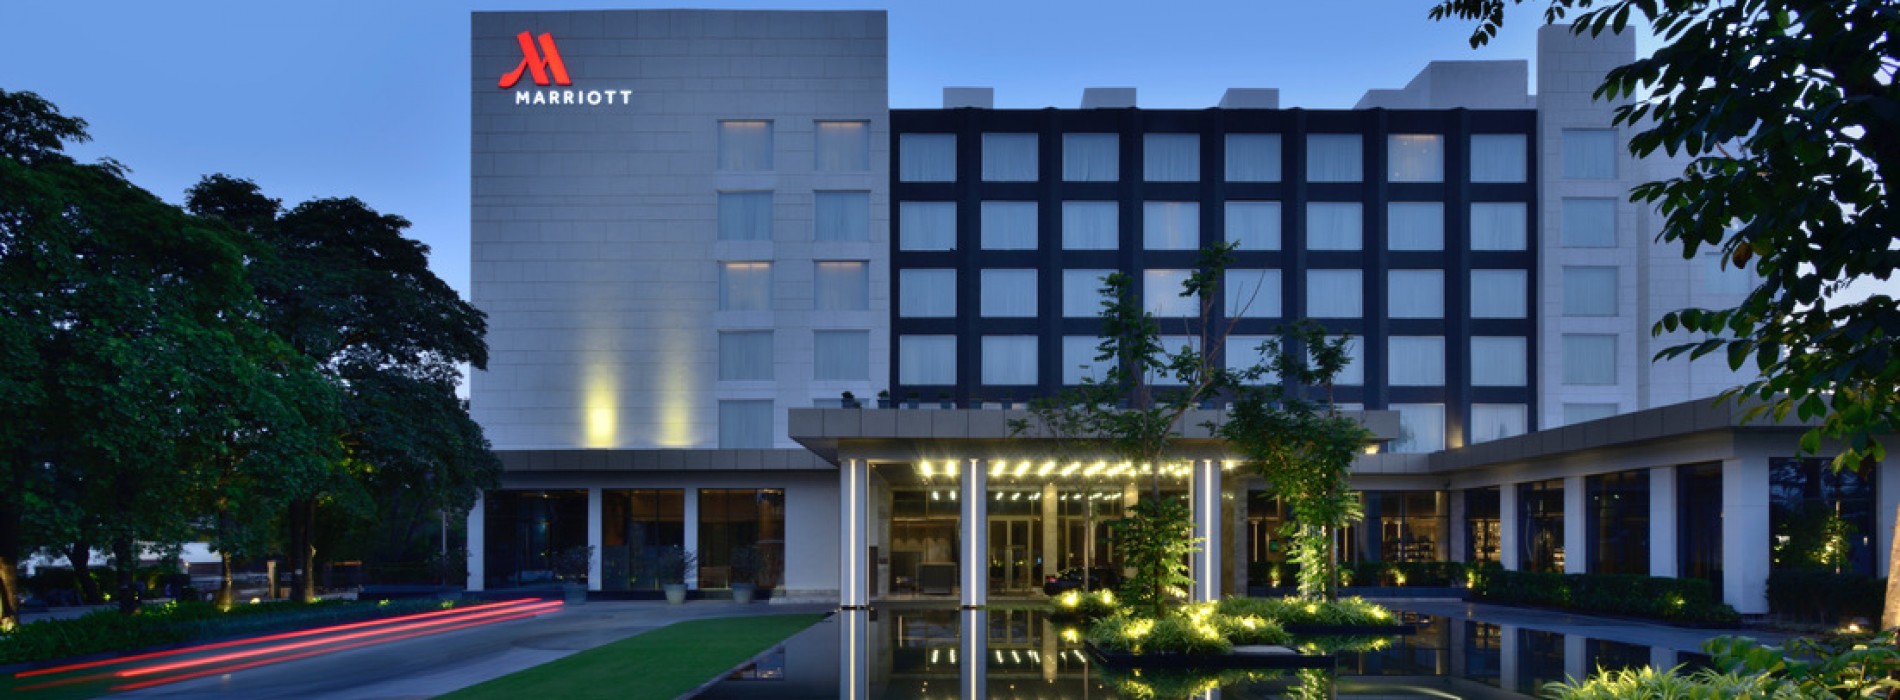 Indore Marriott Hotel titled as ‘Best 5 Star Property of Indore’